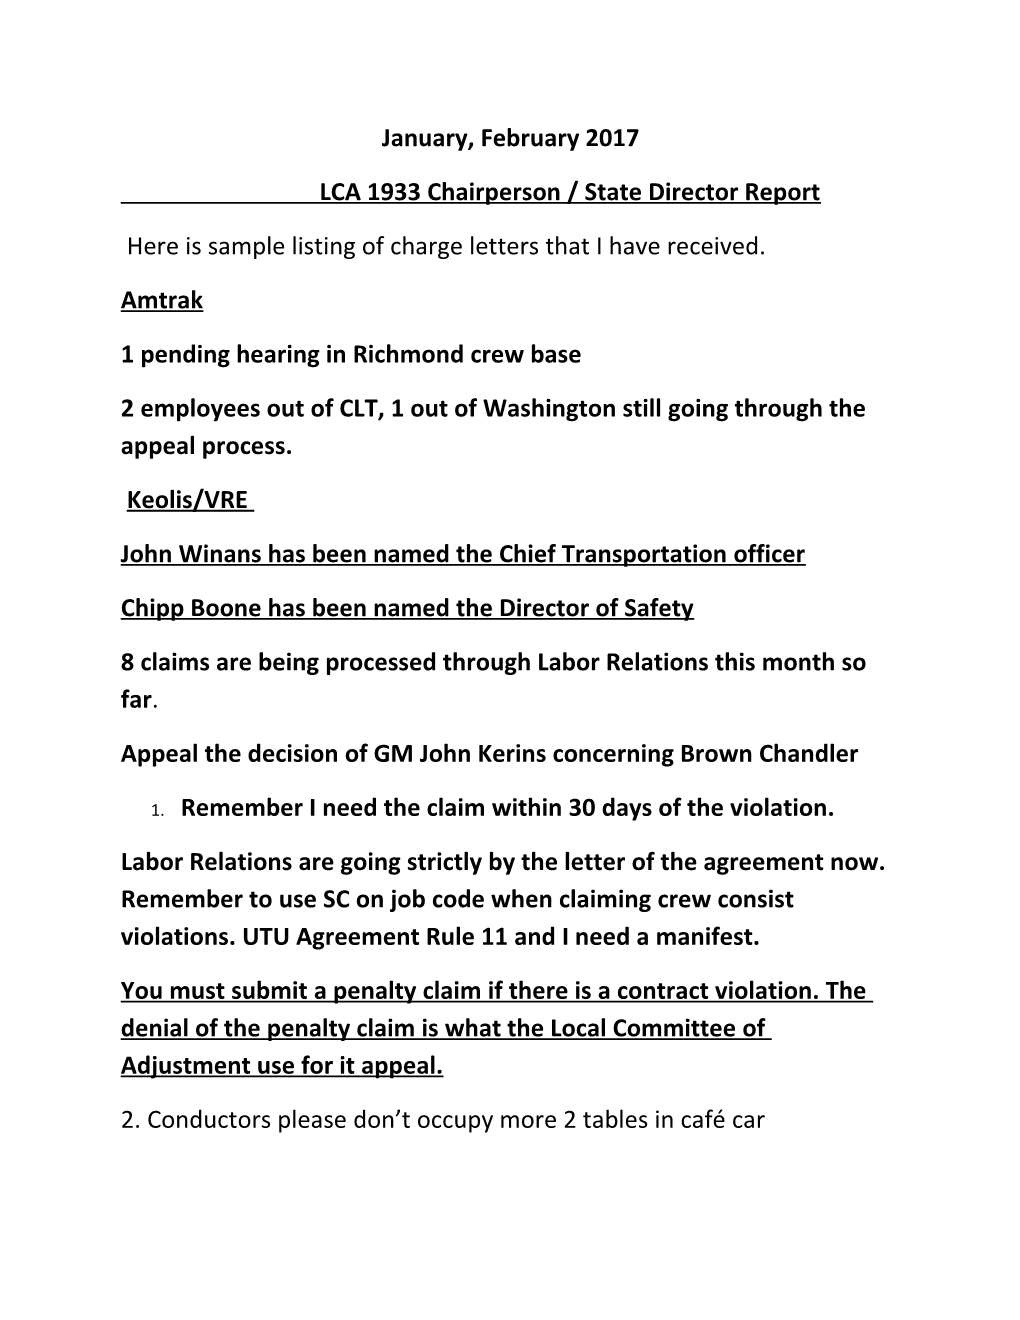 LCA 1933 Chairperson / State Director Report